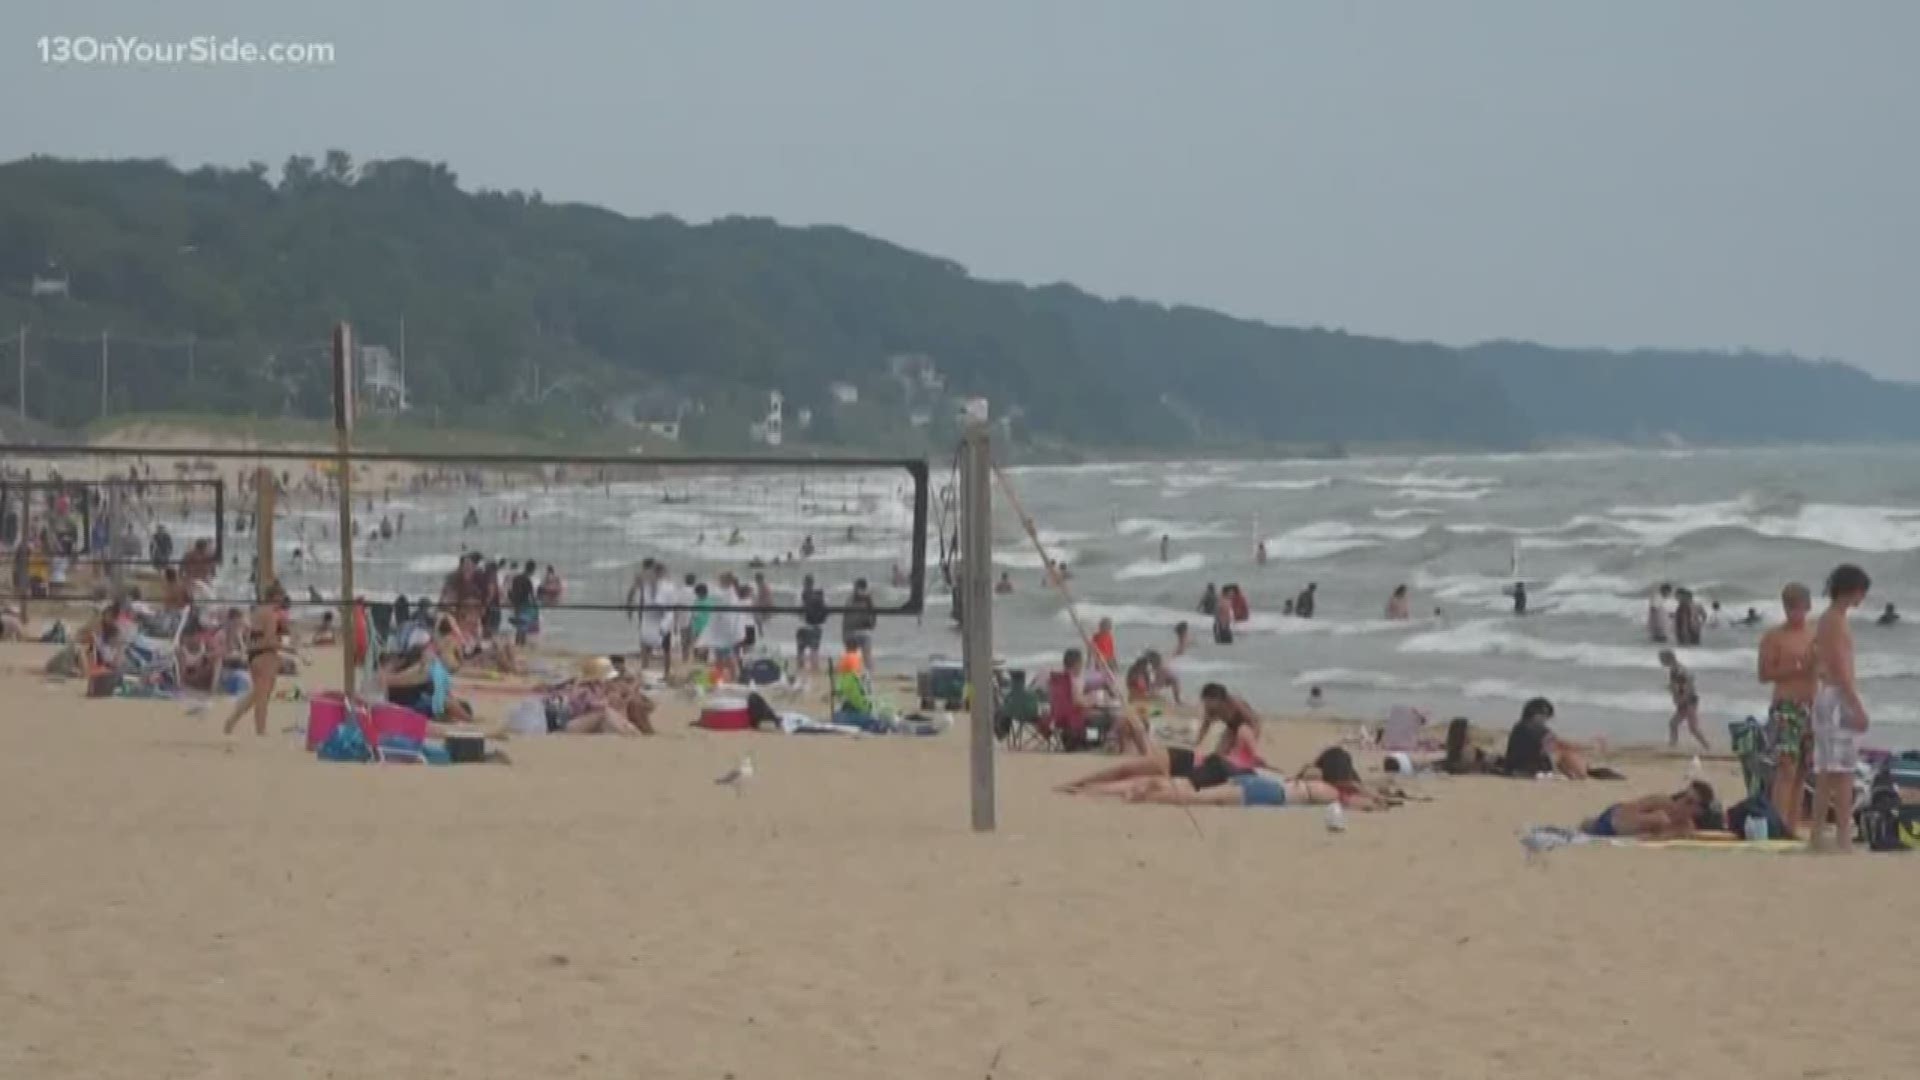 Just months after Elk Rapids banned smoking at numerous public venues, companion bills introduced in Lansing would snuff out smoking at public beaches across Michigan. Bills introduced Tuesday, Sept. 10 in the House and Senate would prohibit smoking of cigarettes and cigars on all public beaches.